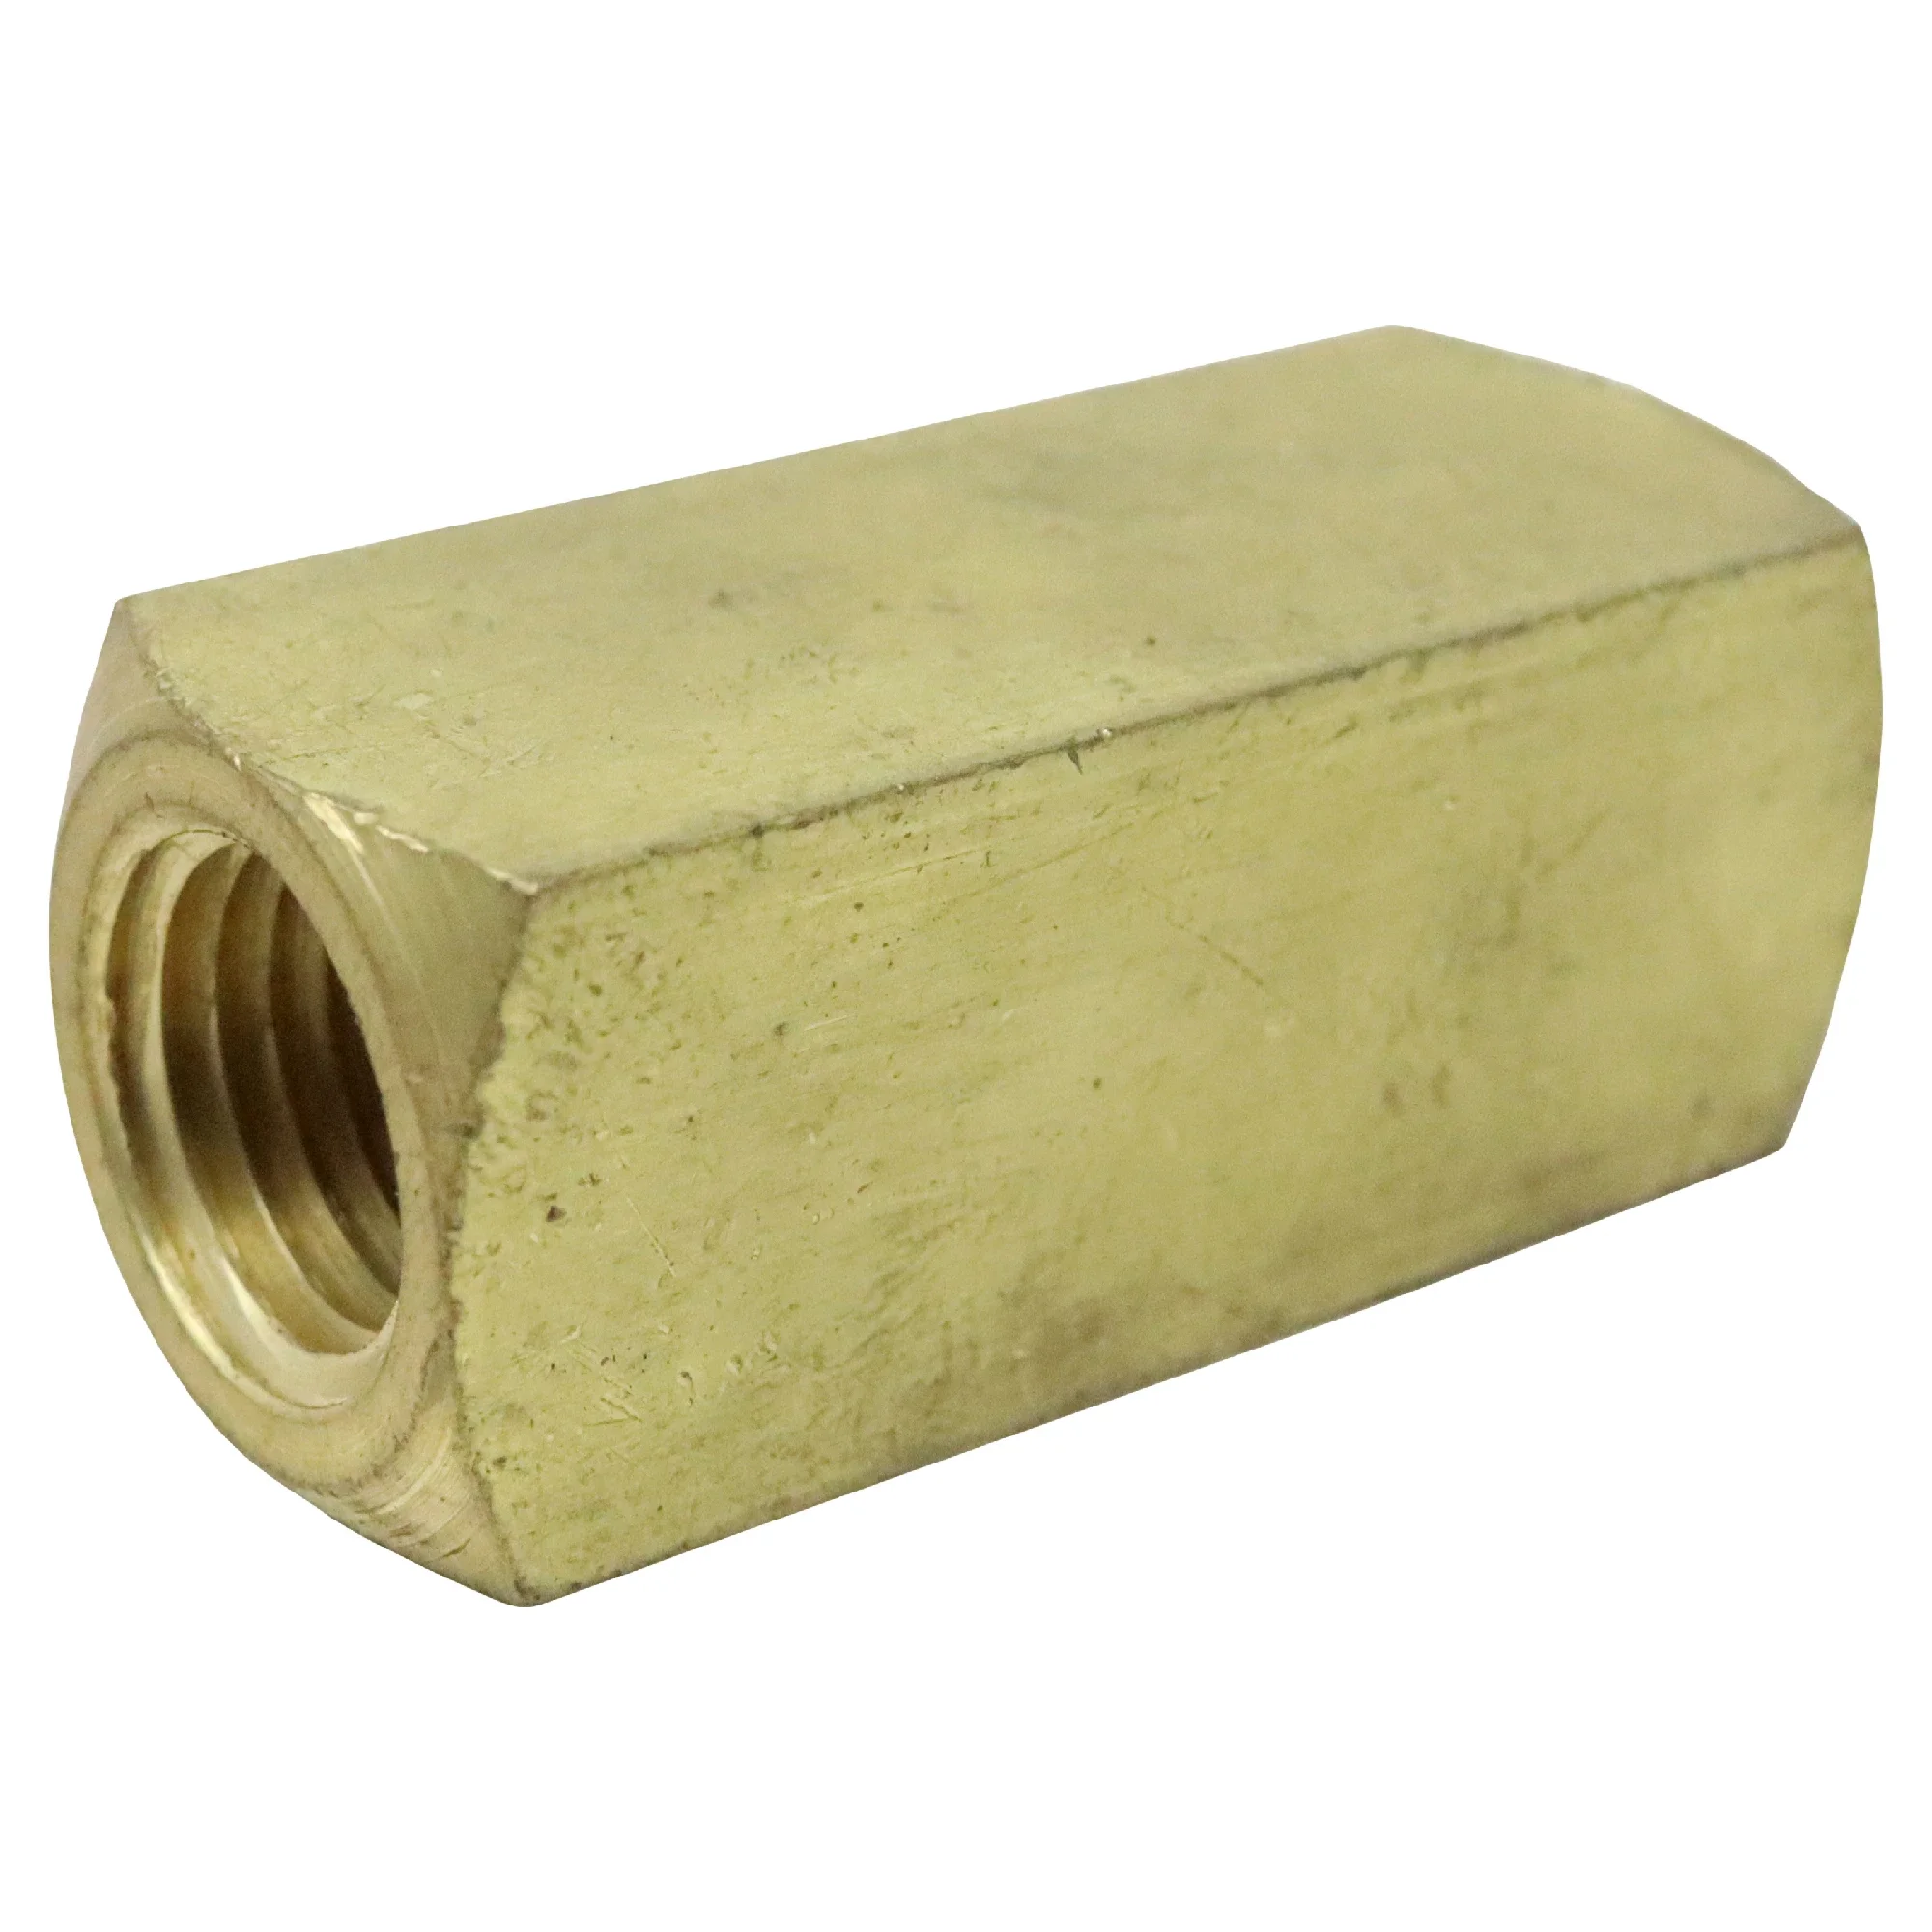 Wastebuilt® Replacement for Wittke Check Valve